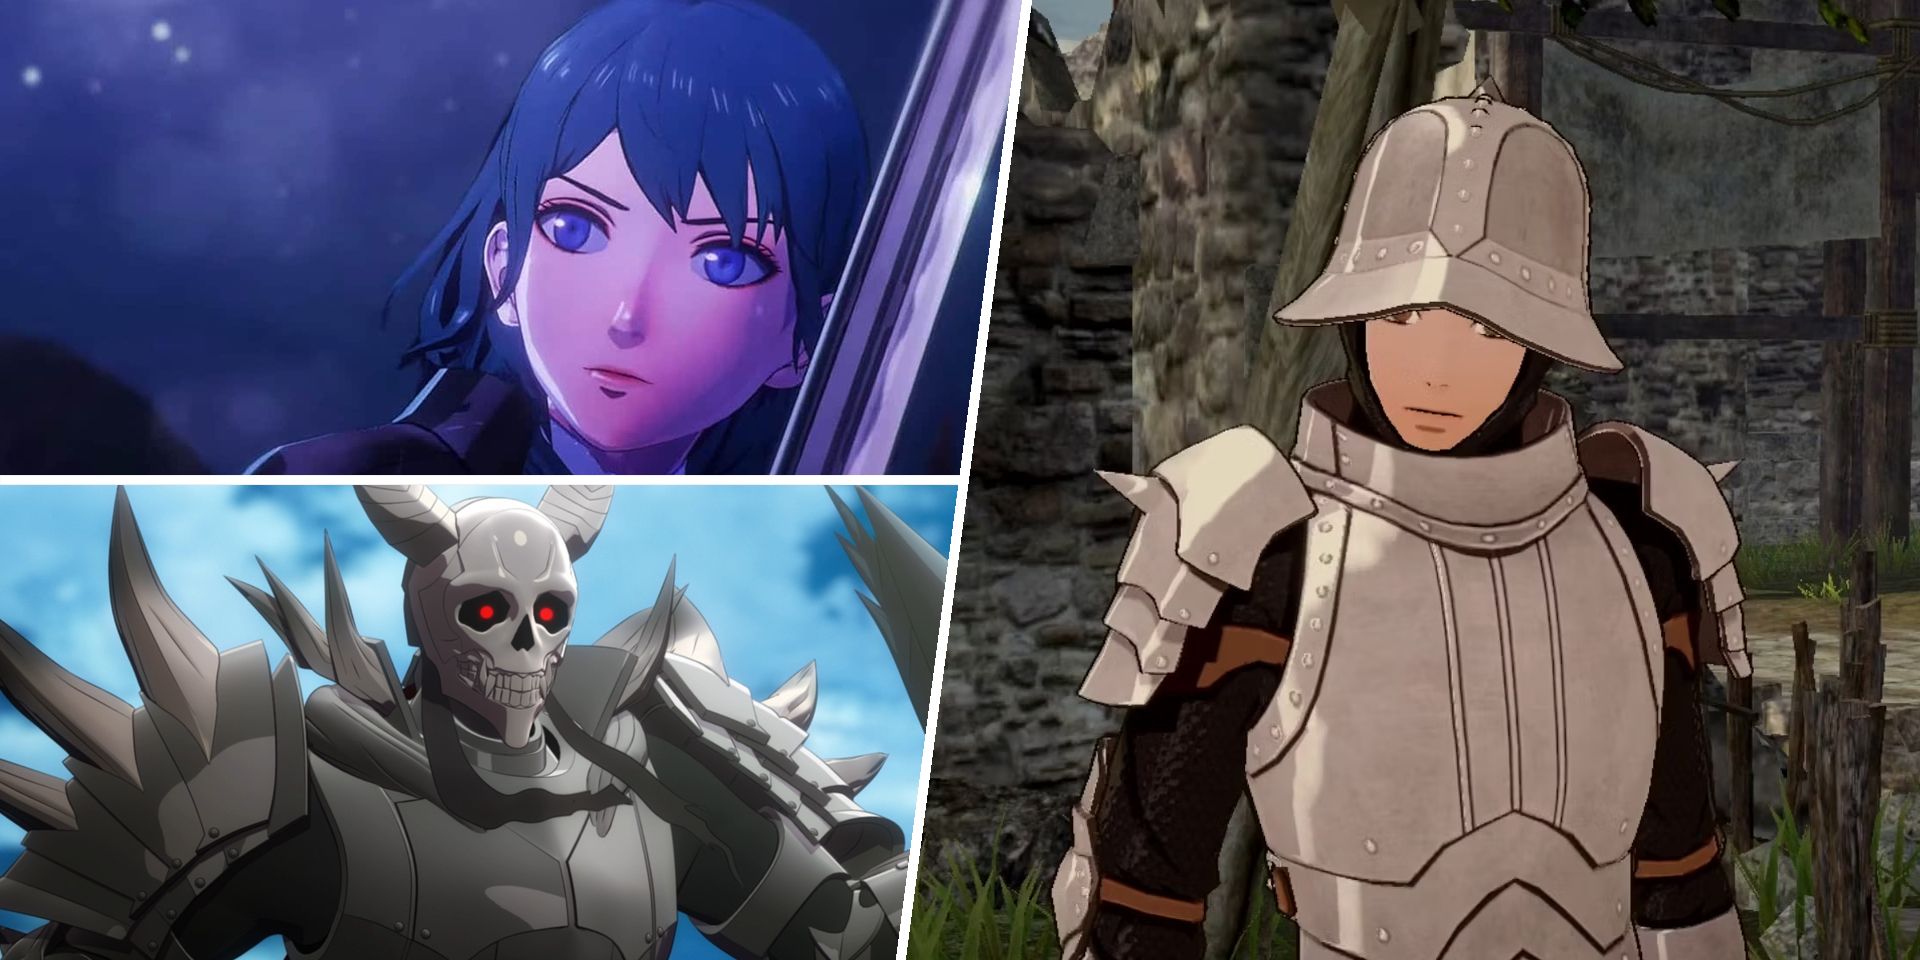 Byleth, Death Knight, and Gatekeeper - three of the recruitable units in Fire Emblem Warriors: Three Hopes